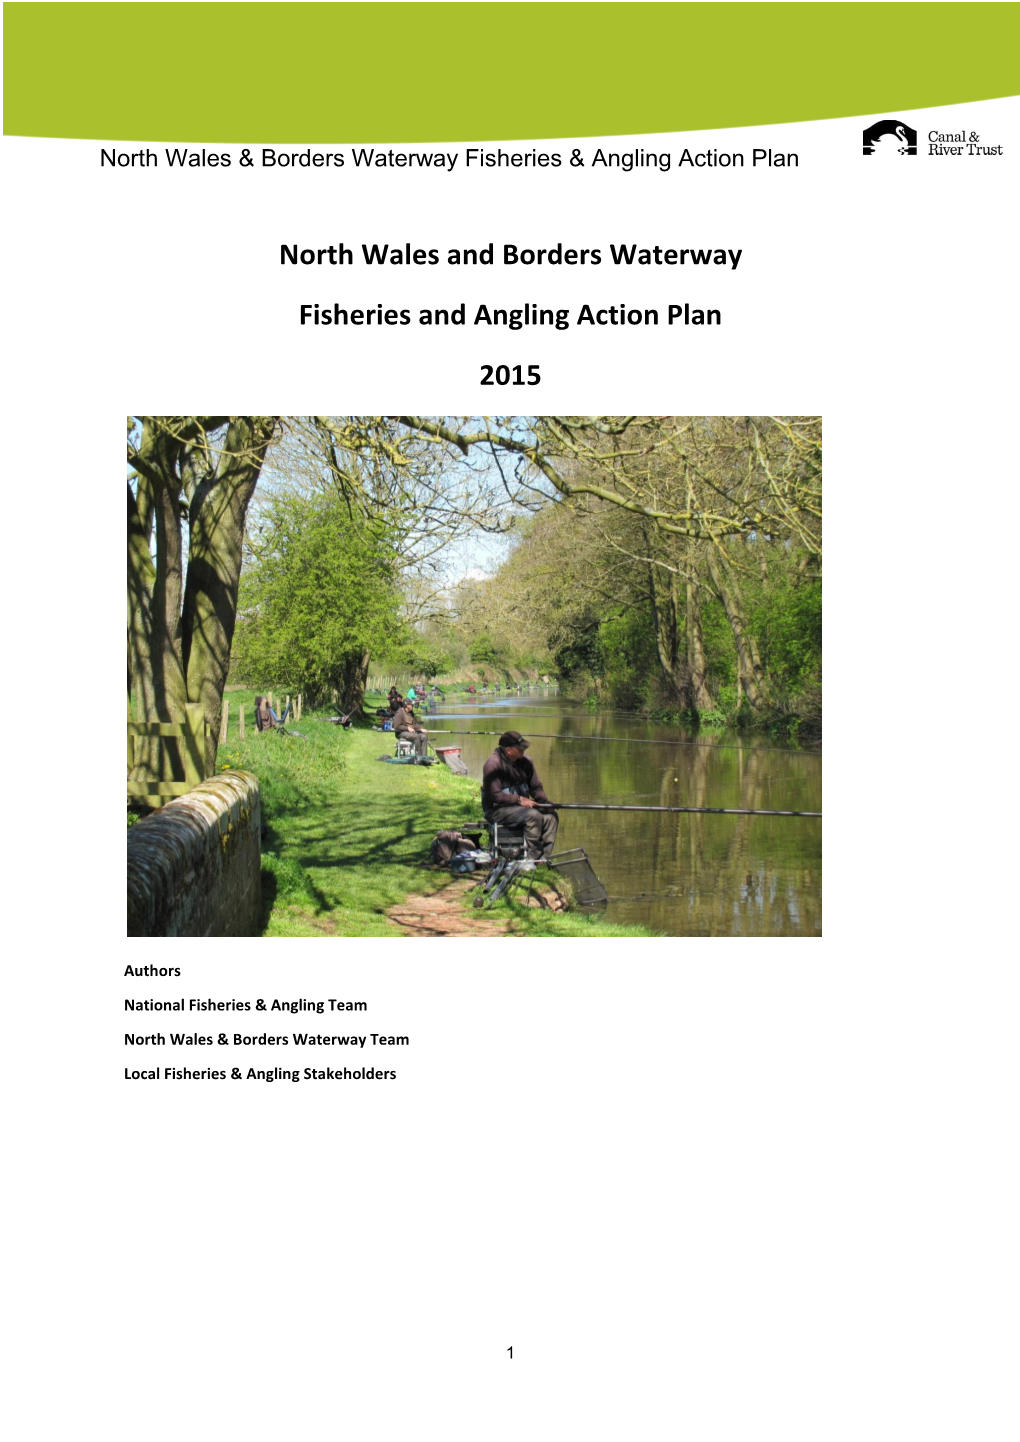 North Wales and Borders Waterway Fisheries and Angling Action Plan 2015